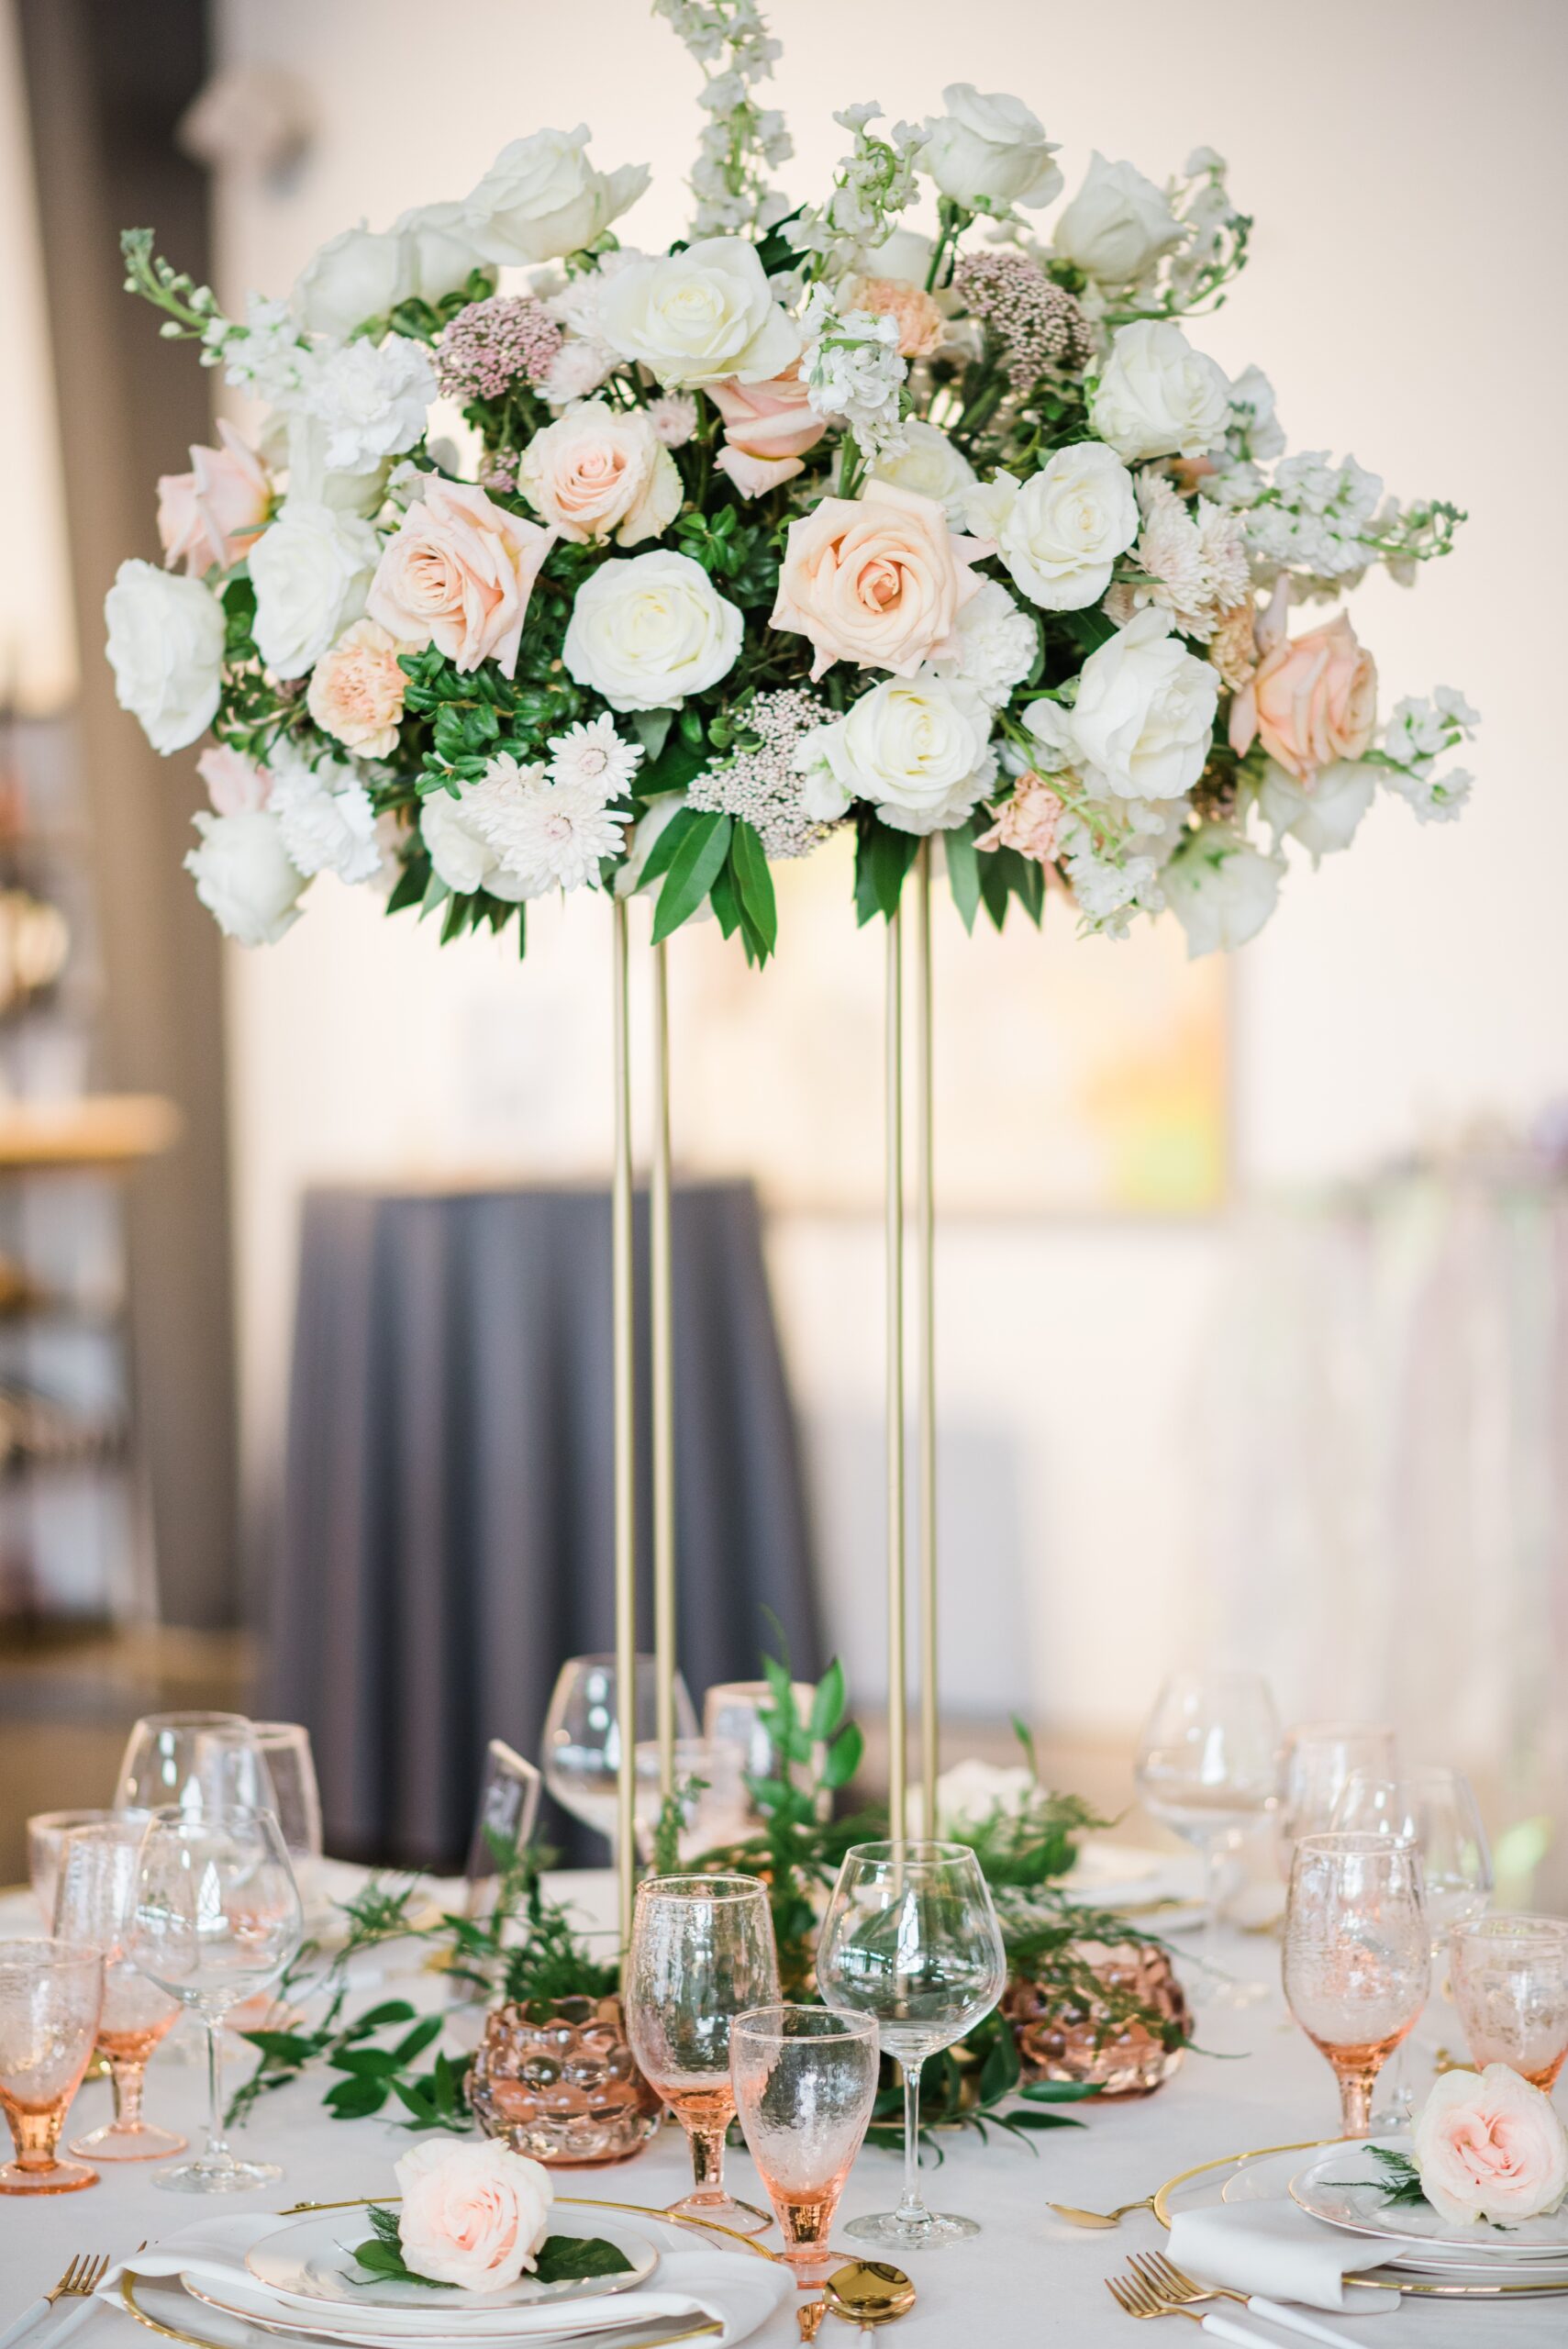 A shot of a reception table with tableware and a tall centerpiece holding a bouquet of pink and white roses